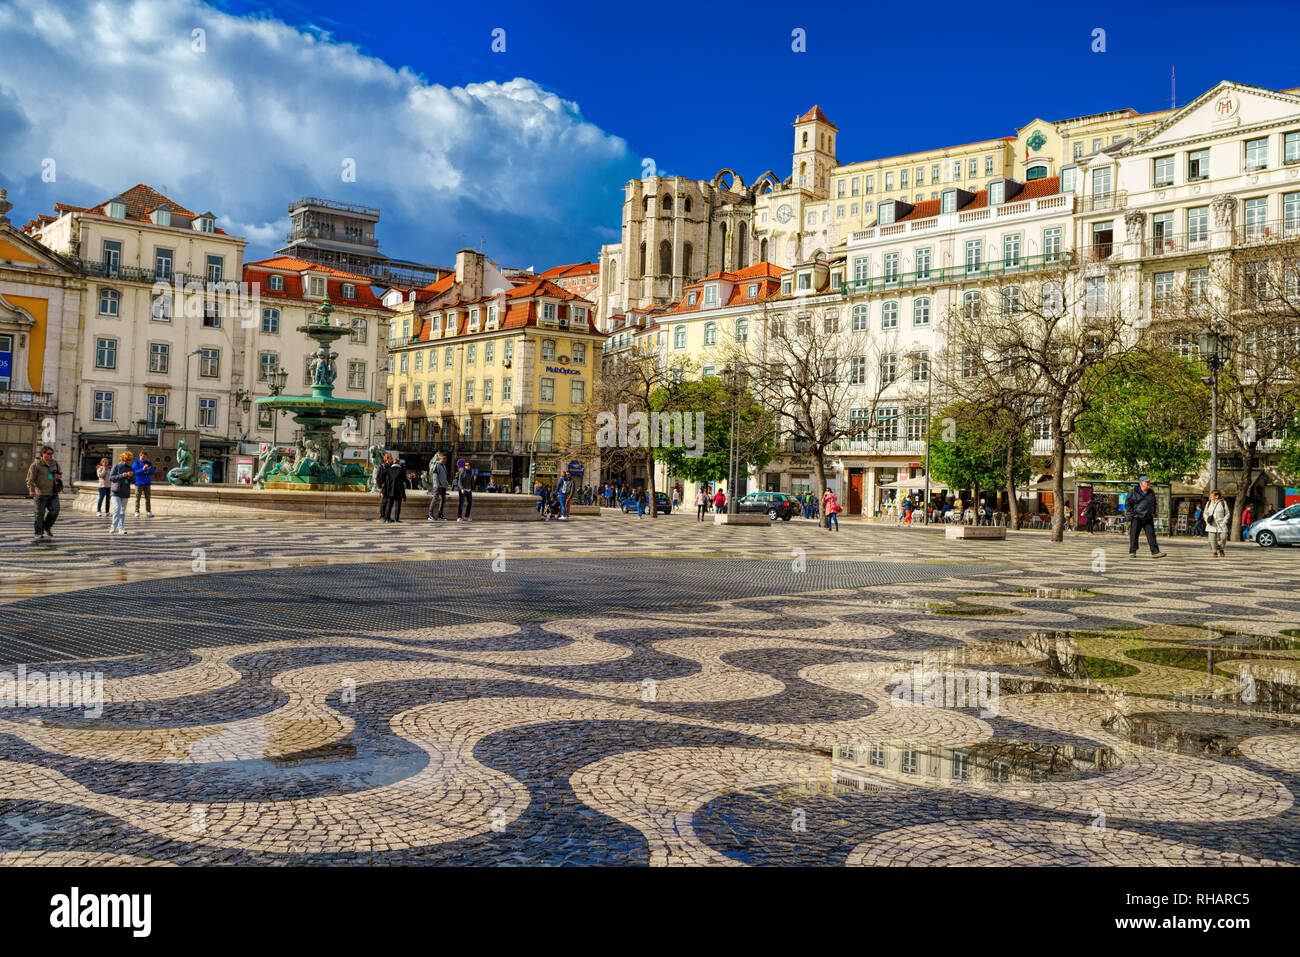 People walk in Dom Pedro IV square, also called Rossio, in Lisbon, Portugal Stock Photo